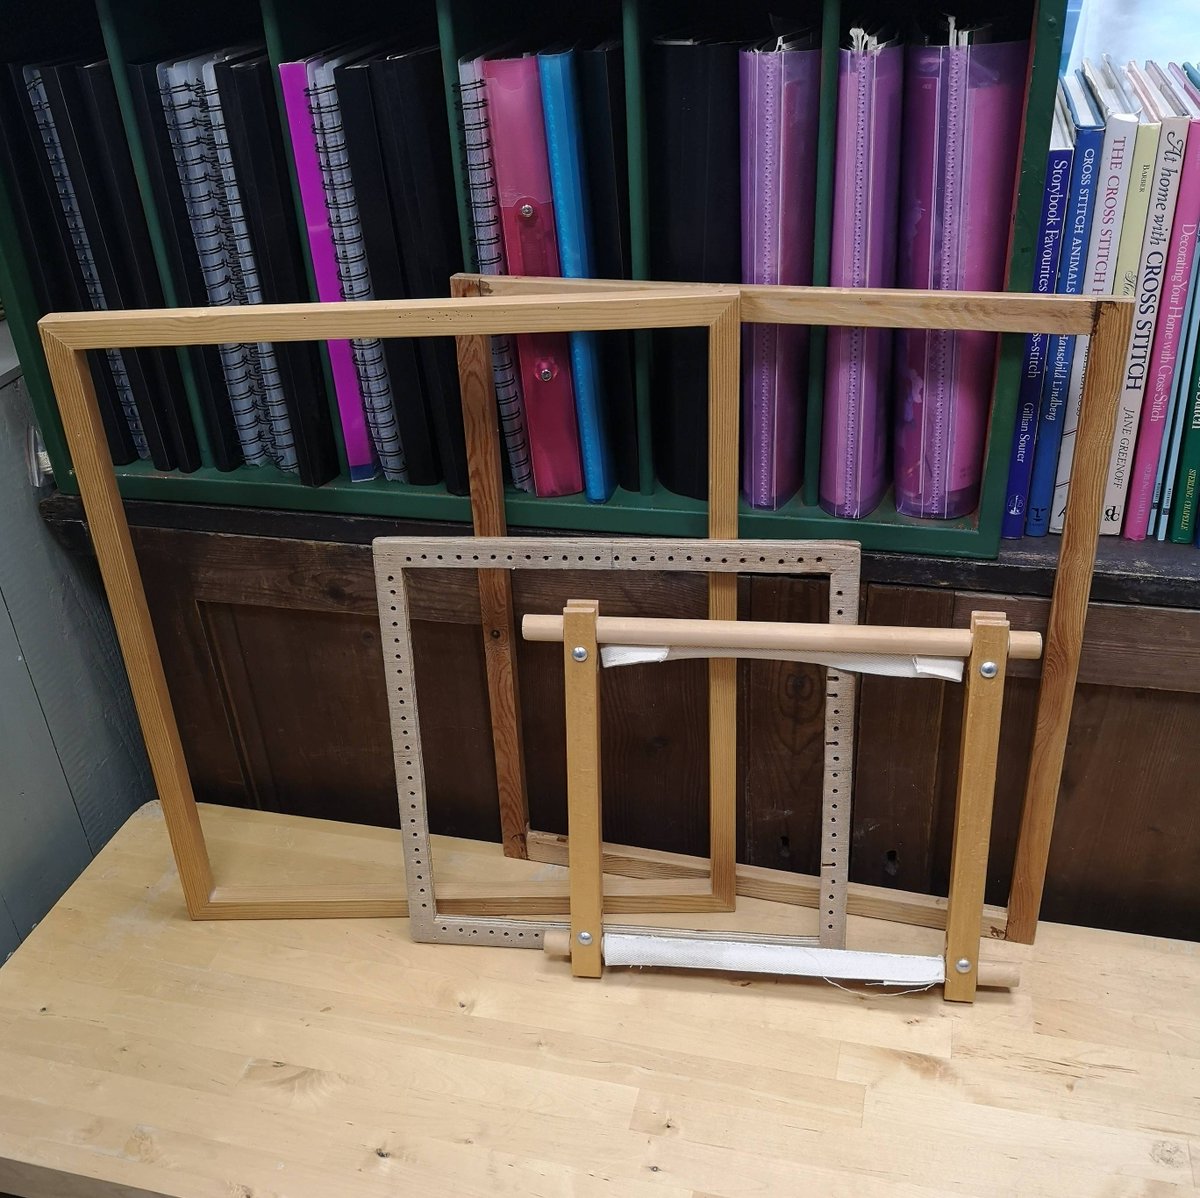 We've received a donation of embroidery frames and hoops today. The current proceeds will be sent to DEC Turkey/Syria to support the work being done there following the recent earthquake.
#embroidery #embroideryframes #embroideryhoops #tapestry